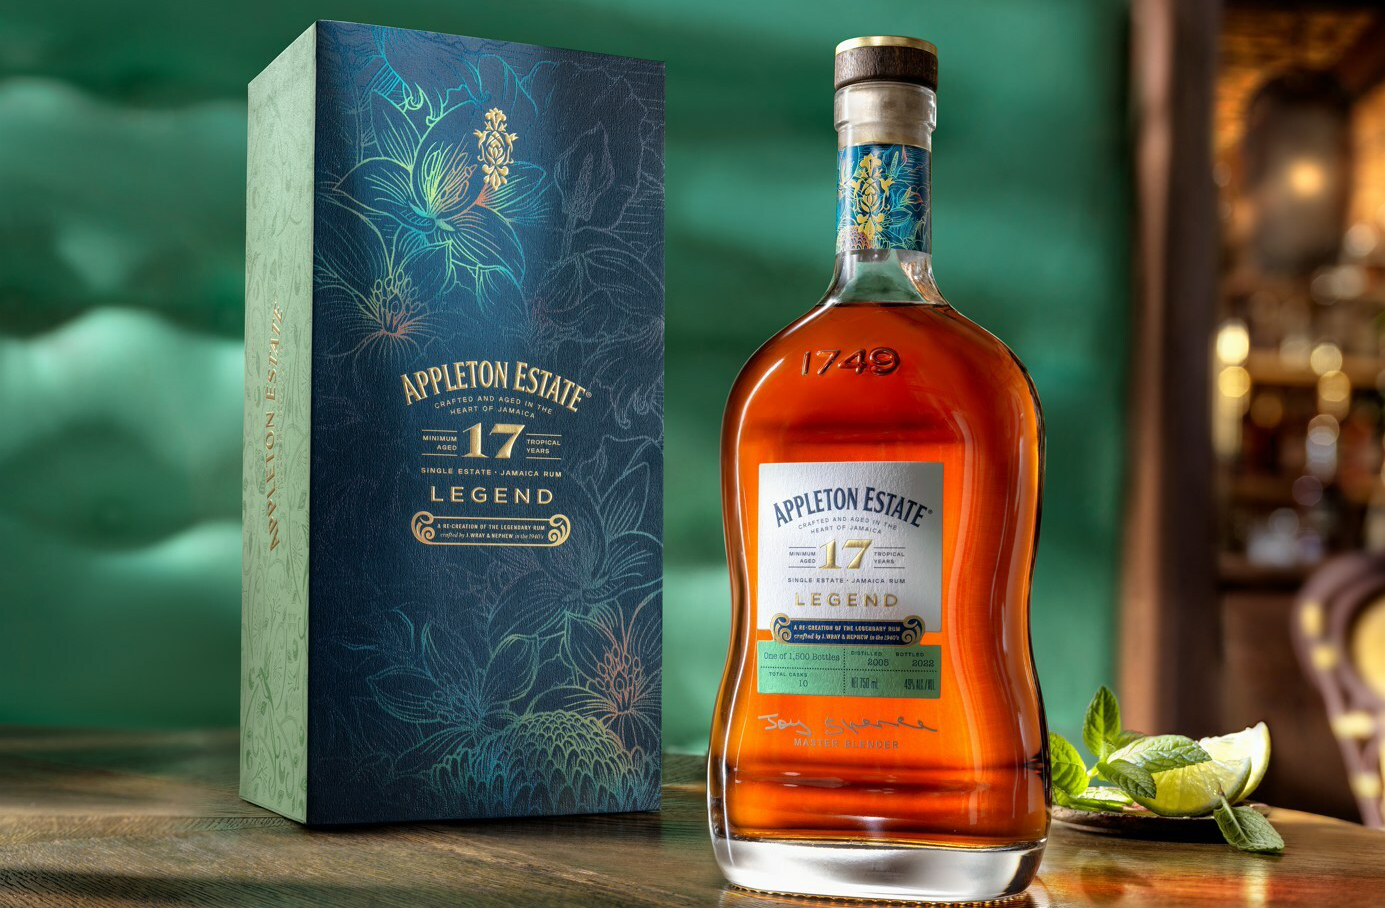 Appleton Estate 17 Year Old Legend Is A Tribute To The Rum Used In The Original Mai Tai Cocktail